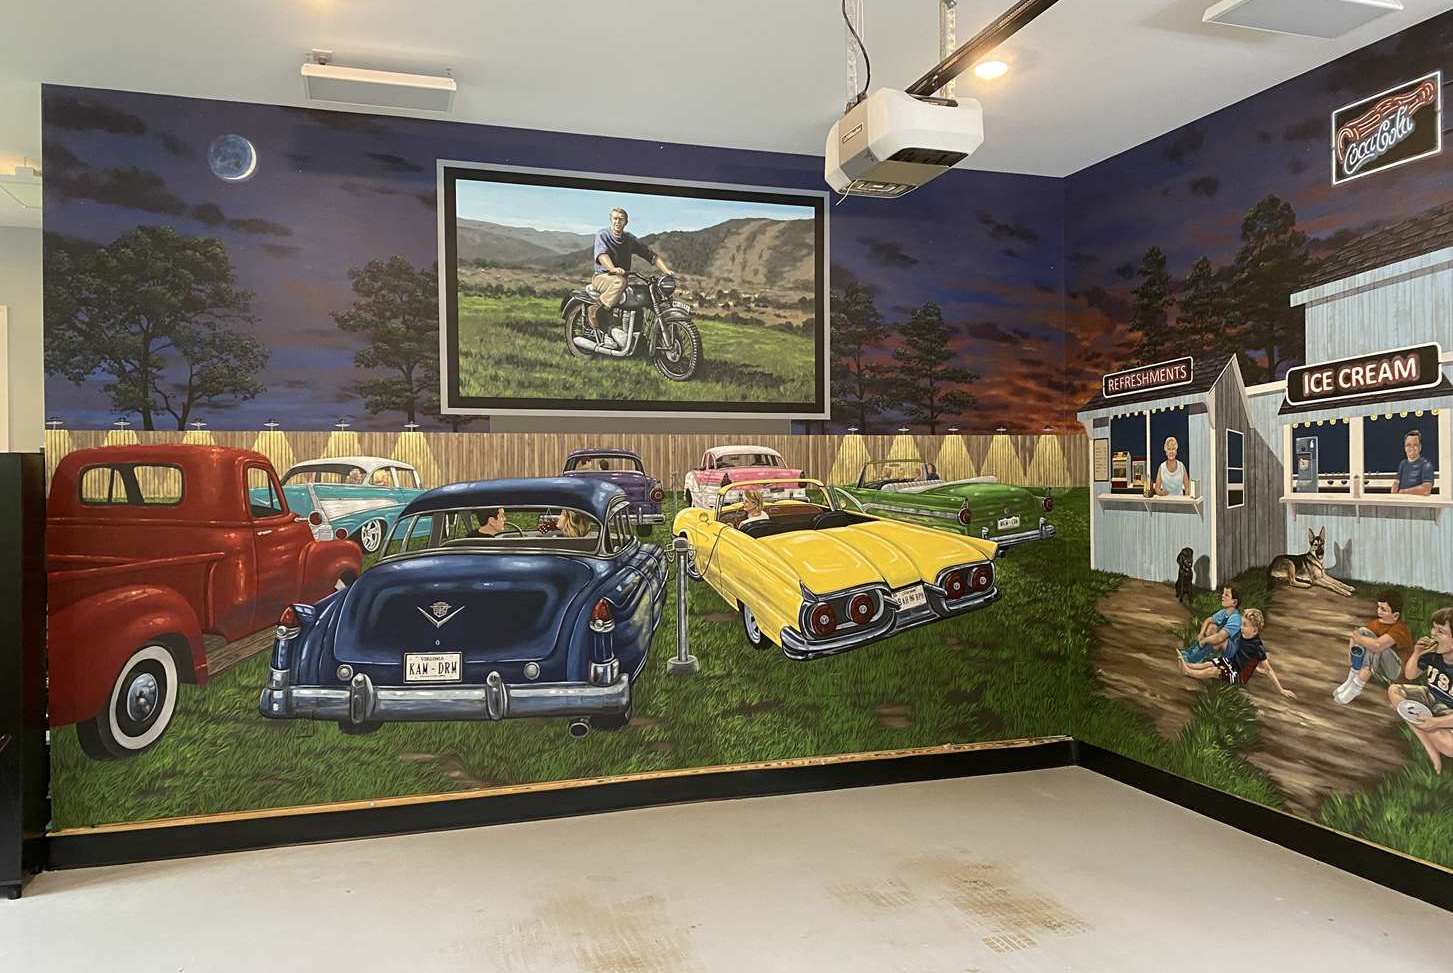 1950s-Drive-In-Theater-Mural-1-sized.jpg